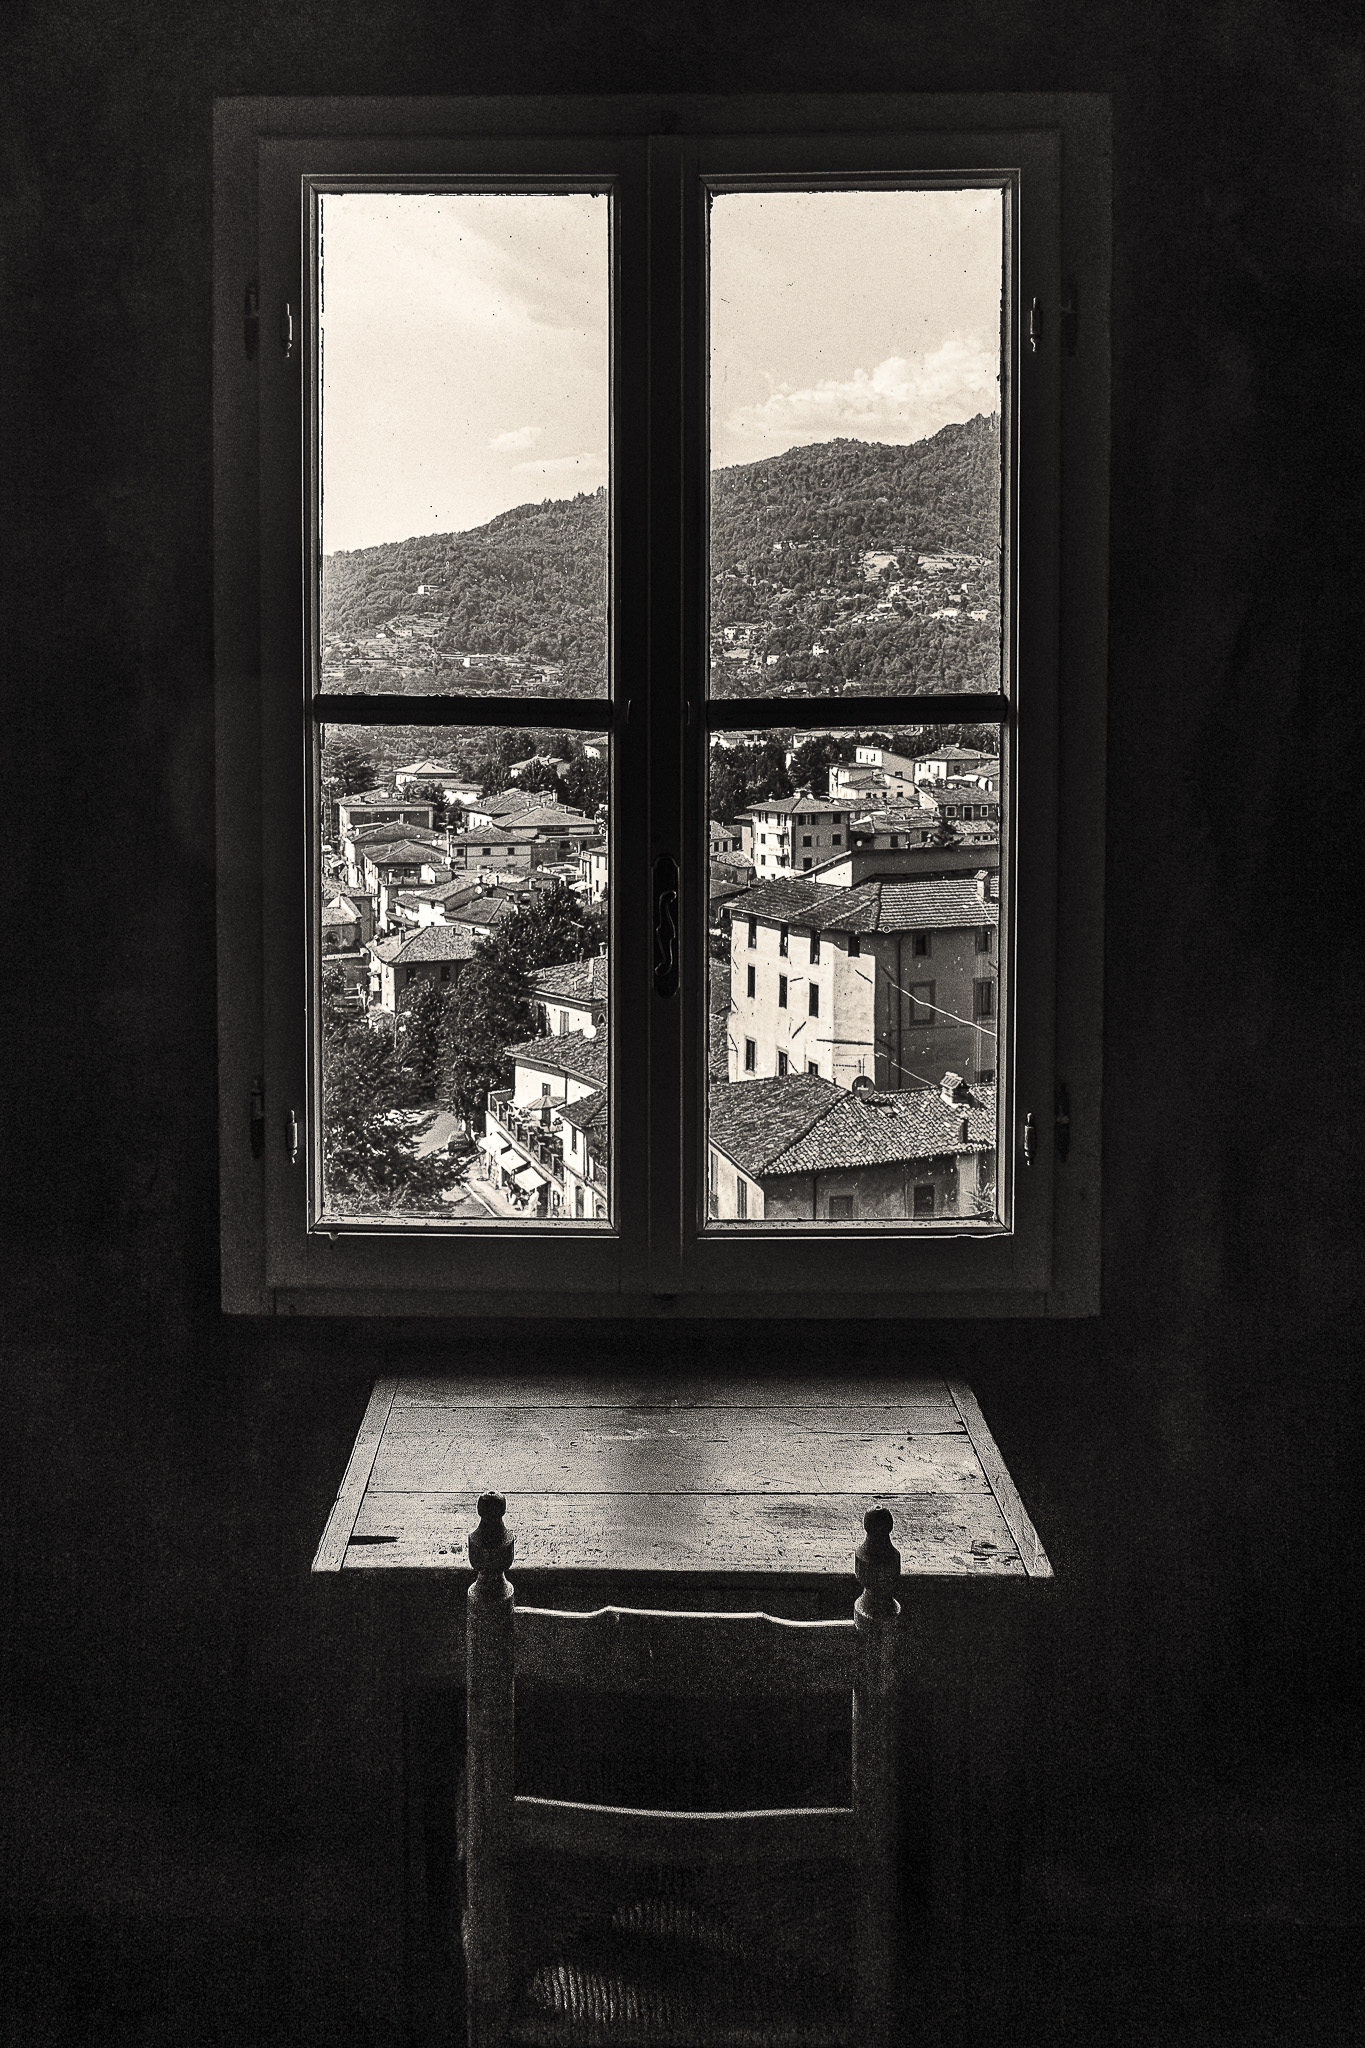 Black and white image of a table and chair at window